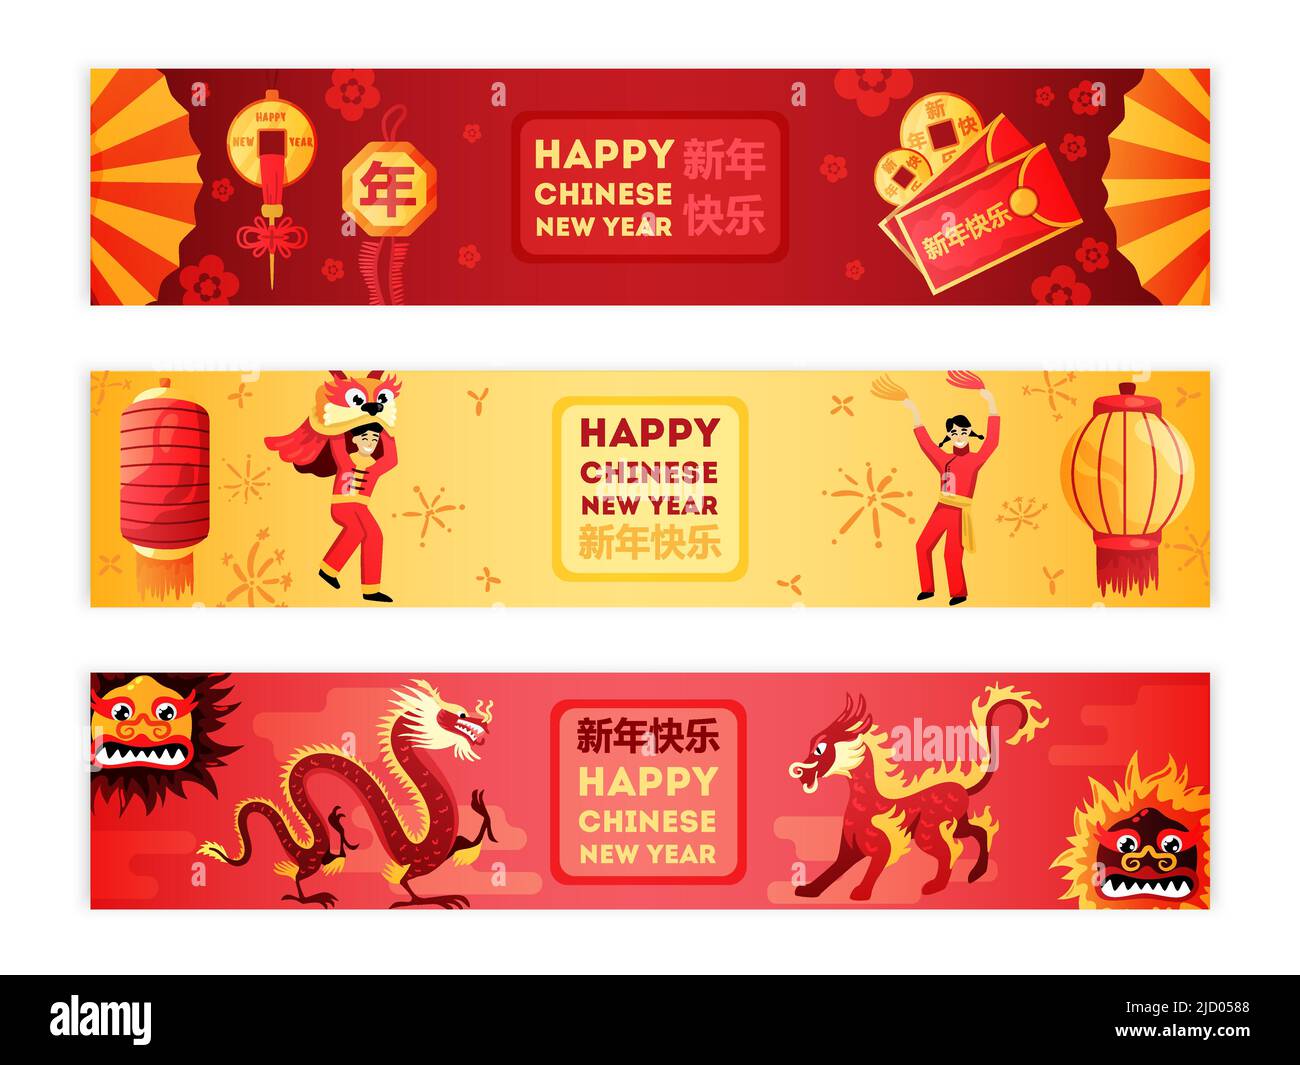 Happy chinese new year greetings celebration symbols lantern dragon mask 3 golden red horizontal banners vector illustration Stock Vector